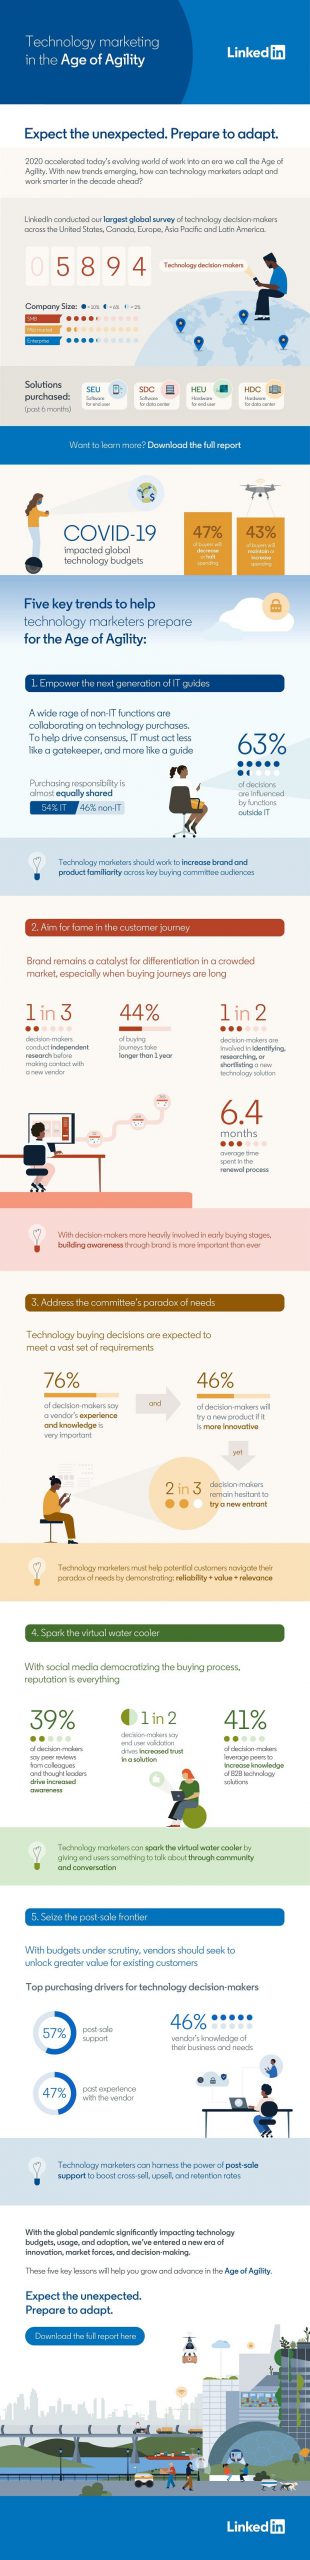 linkedin shares new insights into tech buying trends infographic scaled 1